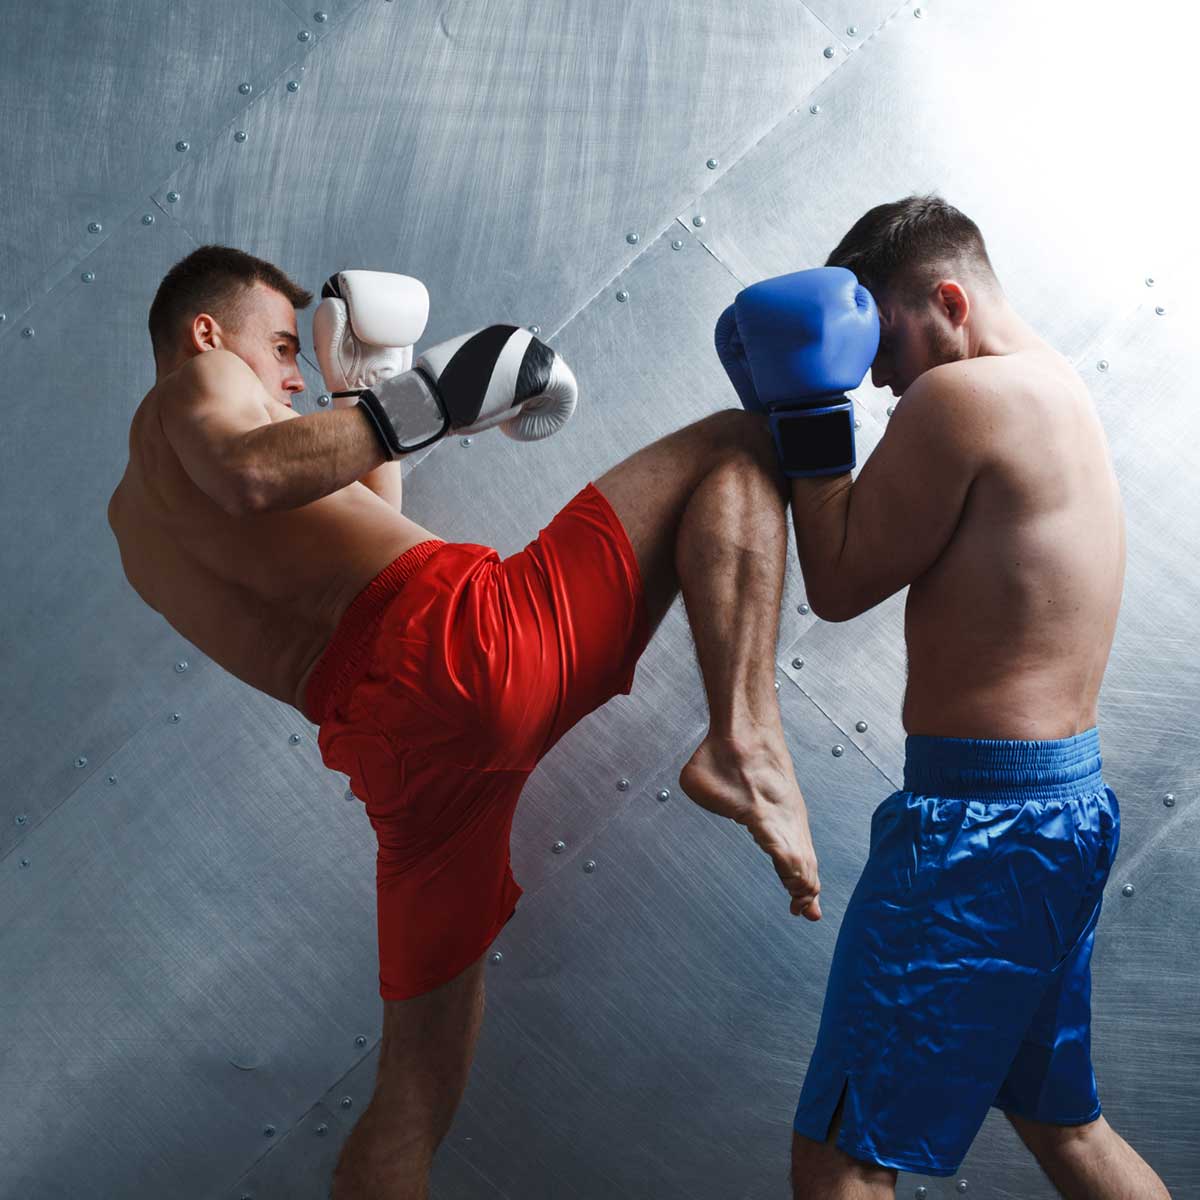 Fight Shorts Manufacturers in Lyubertsy